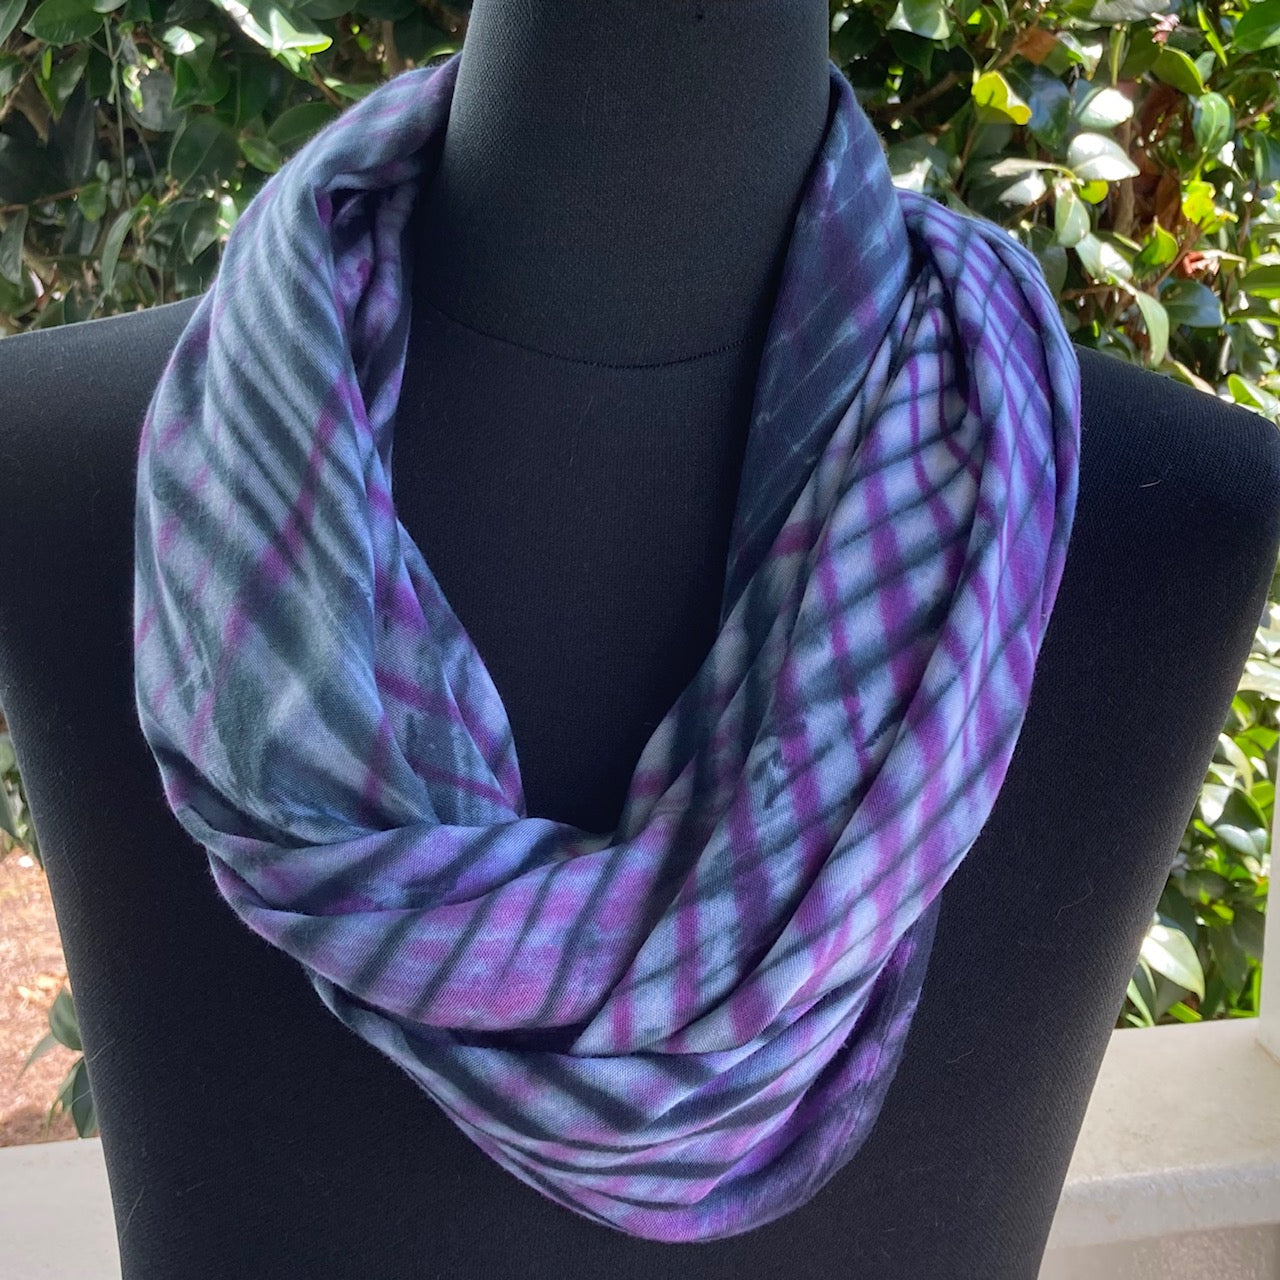 Shibori Rayon Infinity Scarf in Blue and Orchid